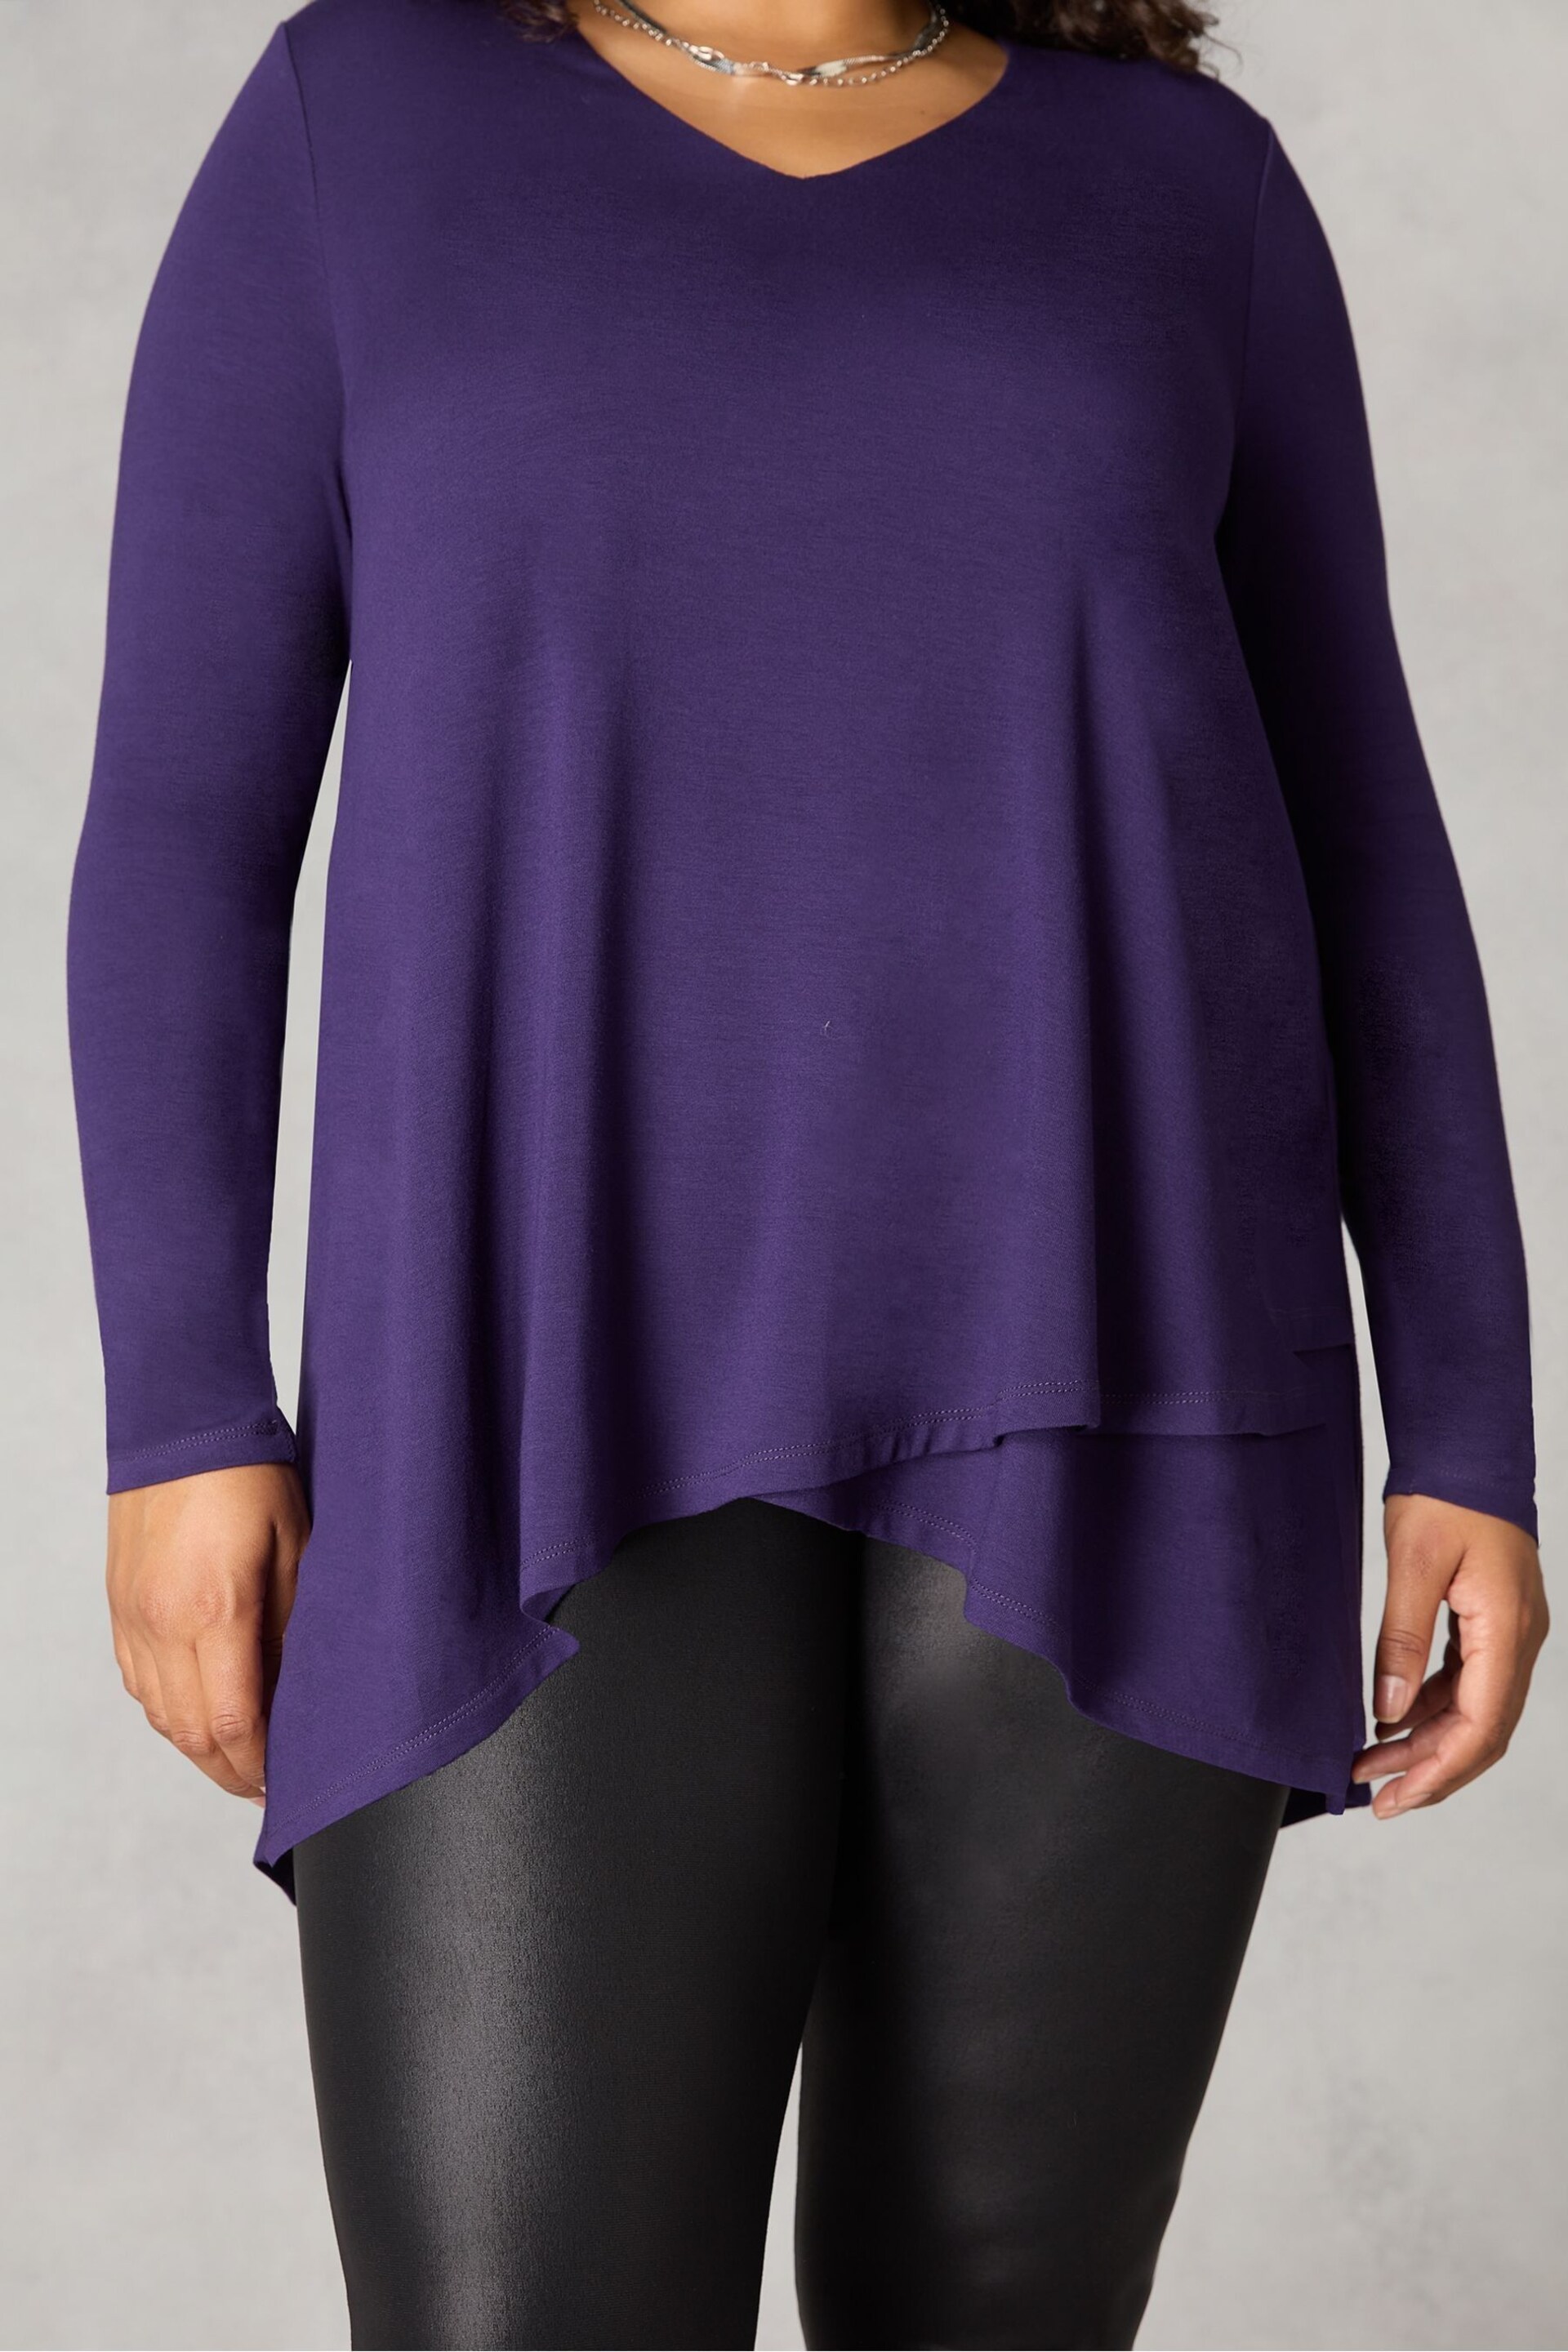 Live Unlimited Jersey High Low Tunic - Image 3 of 4